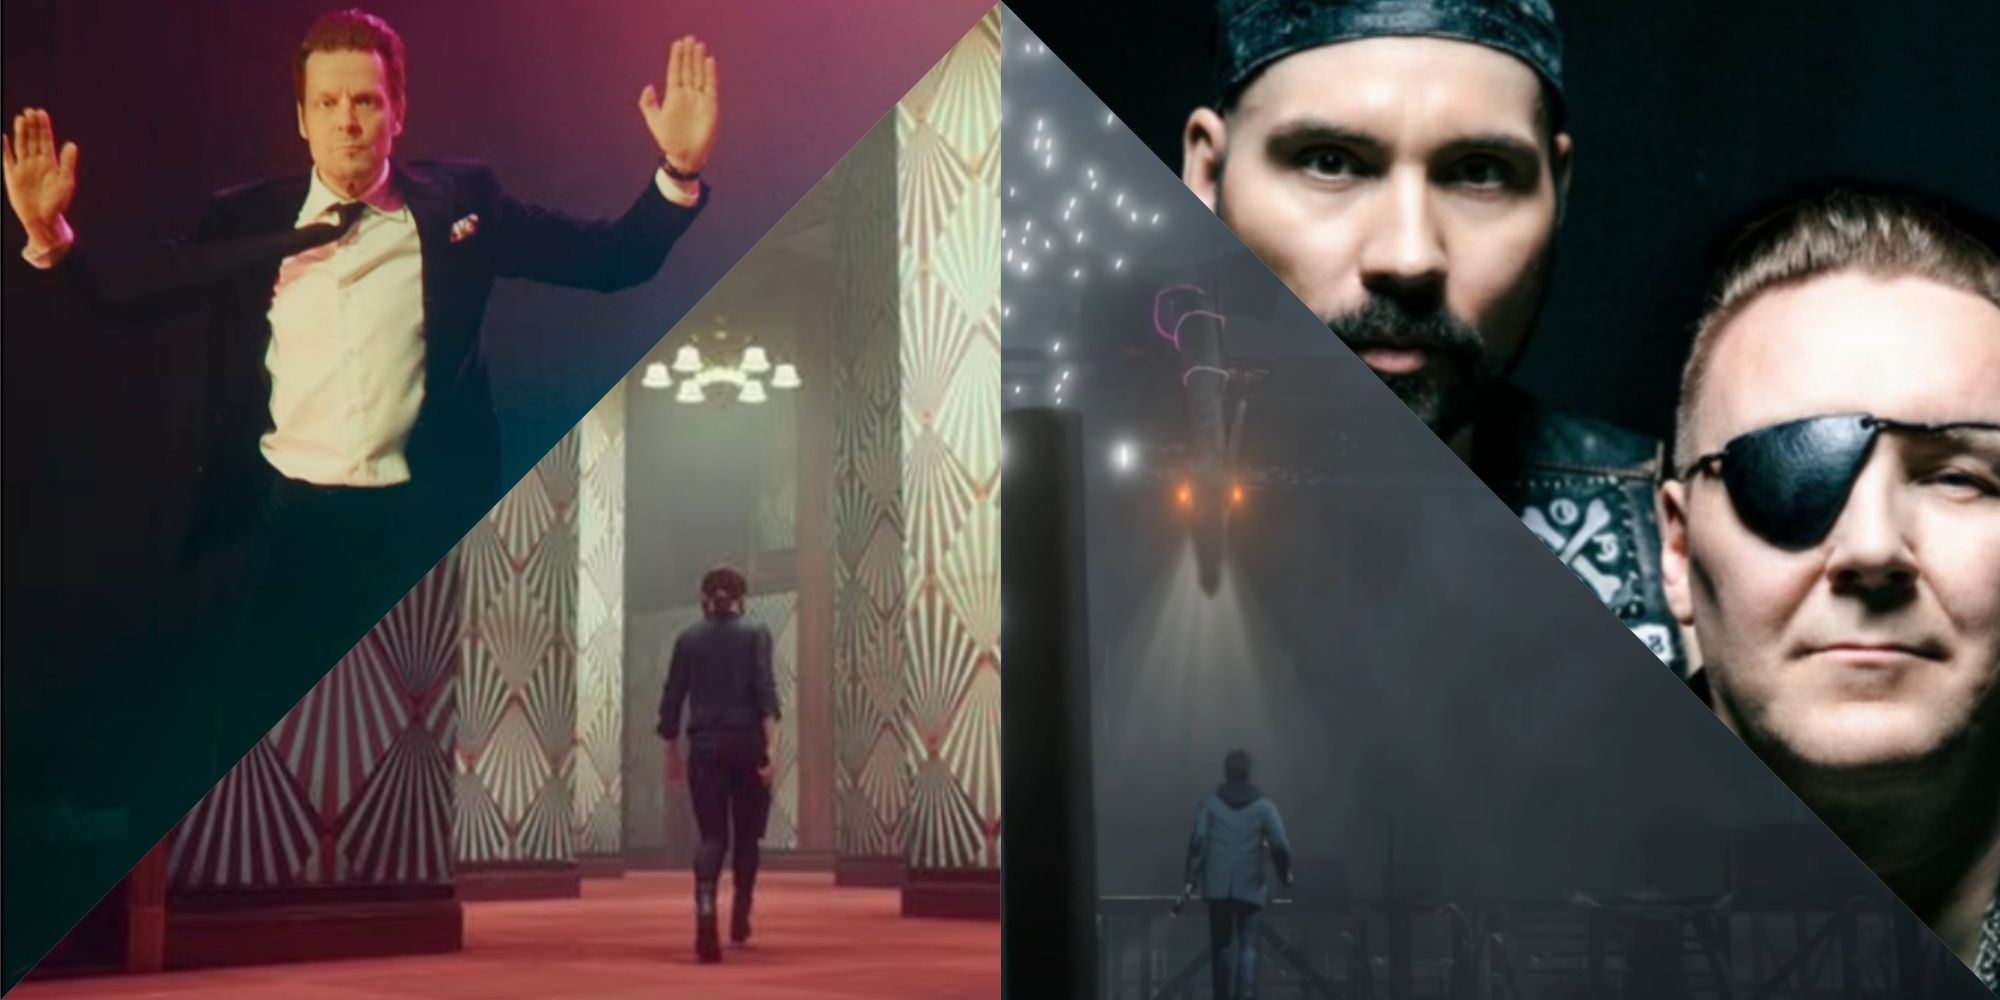 A four-image fragmented triangle pyramid collage of Sam Lake dancing in Alan Wake 2's Herald of Darkness, Jesse entering the Ashtray Maze in Control, Alan Wake before the start of the stage fight musical section, and Poets of the Fall members as Odin and Tor from Old Gods of Asgard.